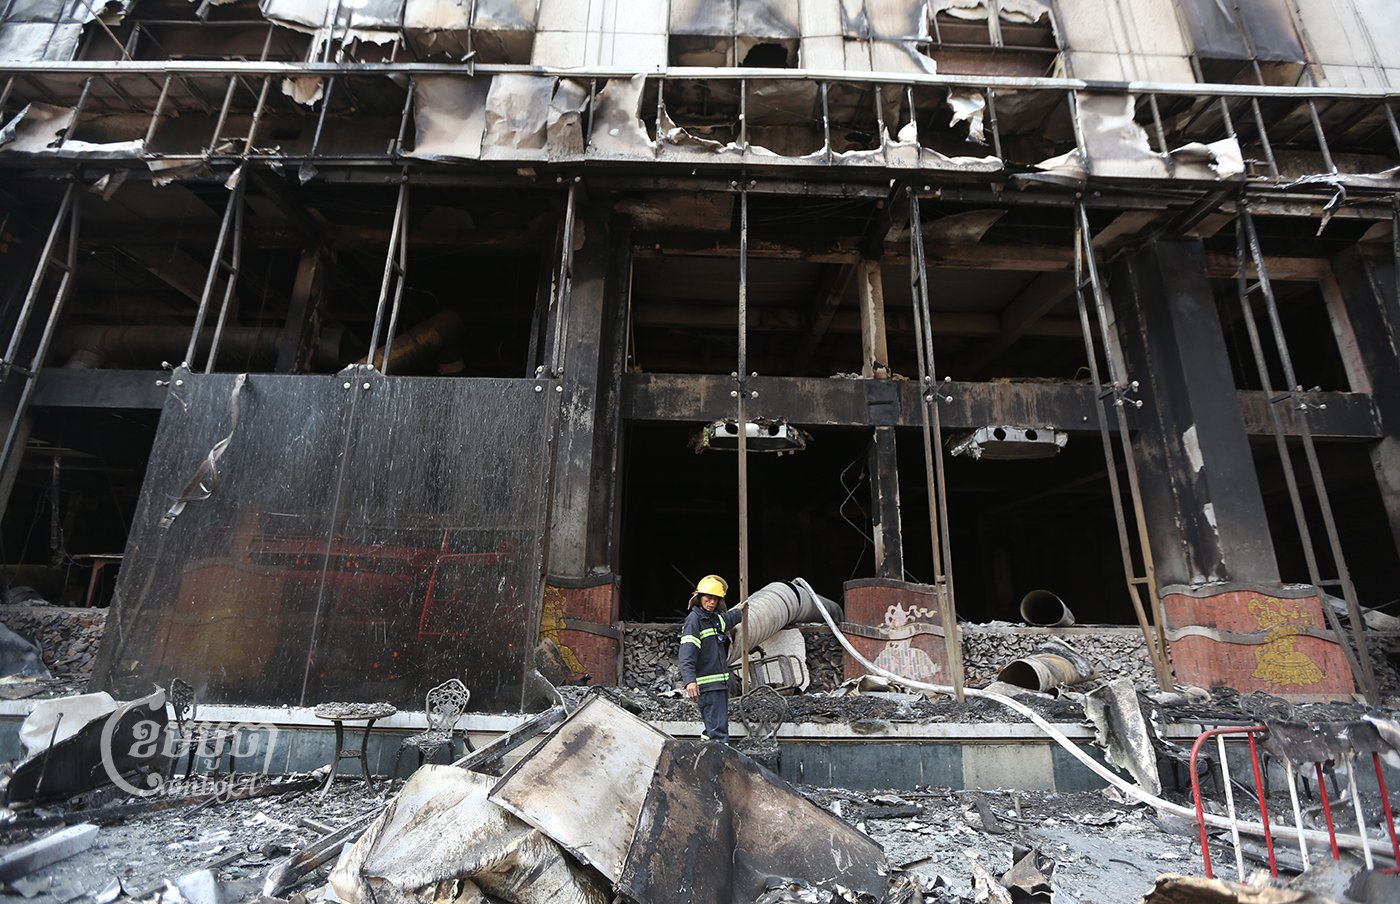 The aftermath of the fire at Grand Diamond City hotel and casino, where at least 27 people died, on December 29, 2022. (CamboJA/ Pring Samrang)